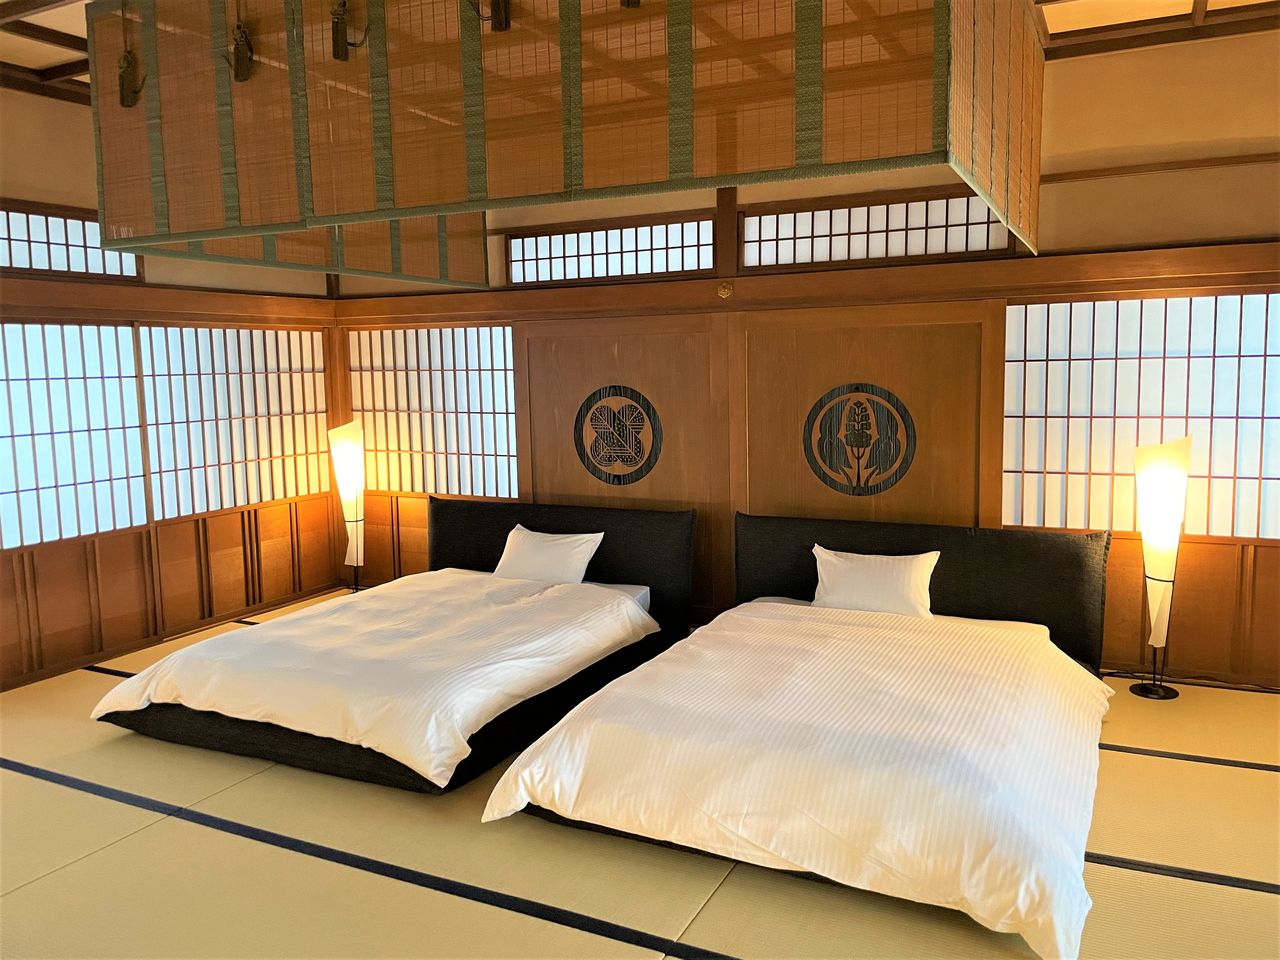 Guests will stay in the watchtower of Fukuyama Castle, sleeping in a spacious room on the second floor. The panels are adorned with the family crests of the area’s former feudal clans, Mizuno and Abe. (© Fukuyama Castle)